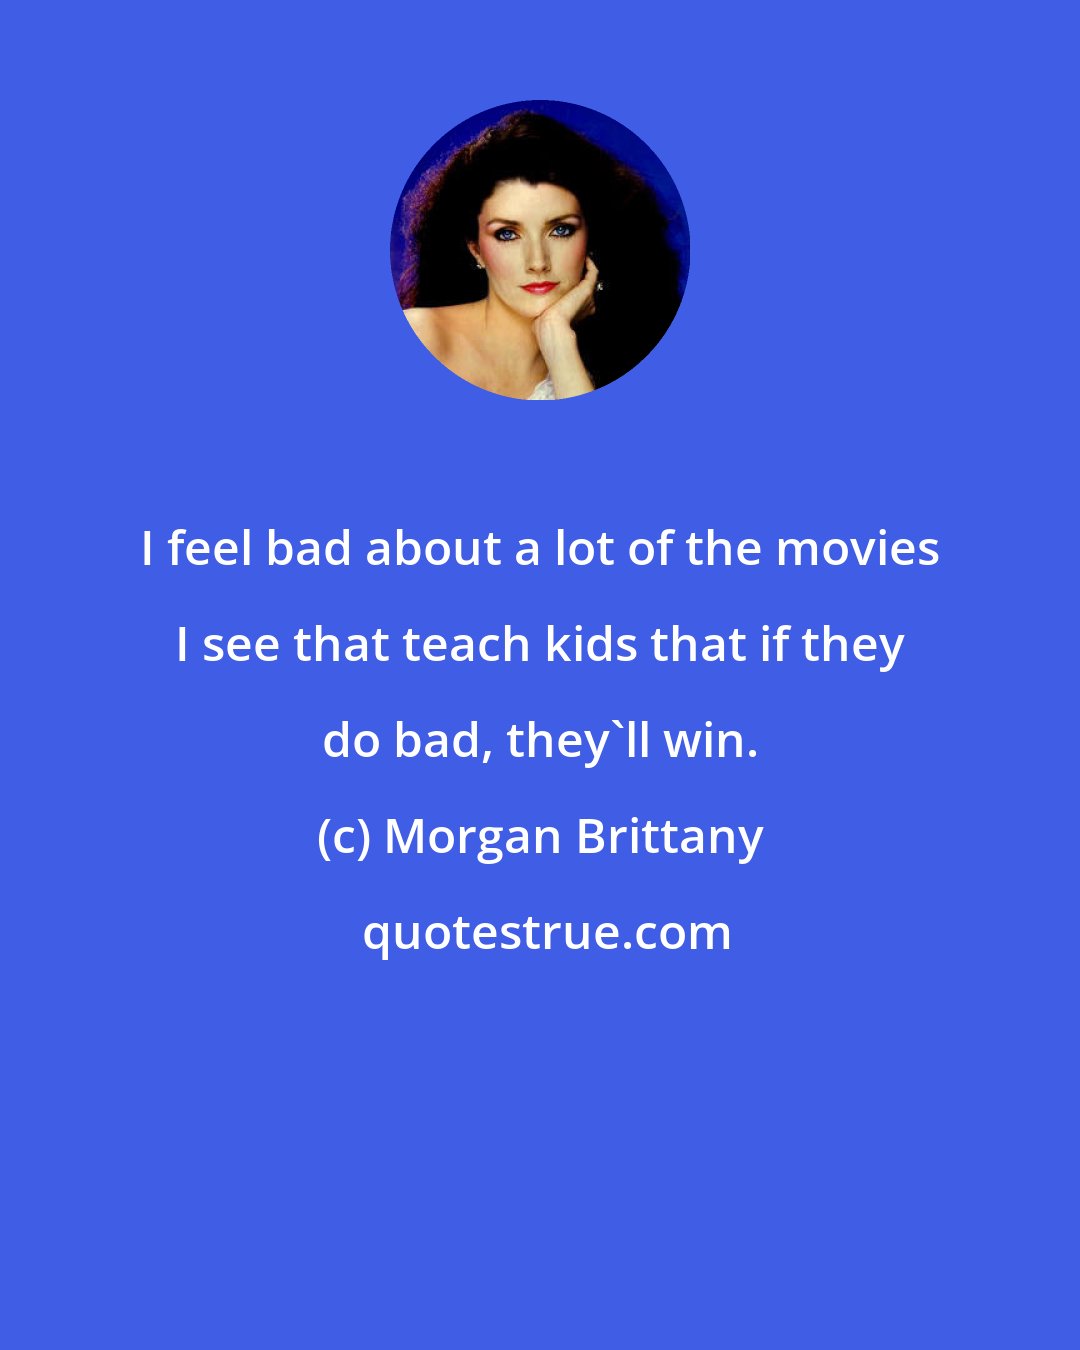 Morgan Brittany: I feel bad about a lot of the movies I see that teach kids that if they do bad, they'll win.